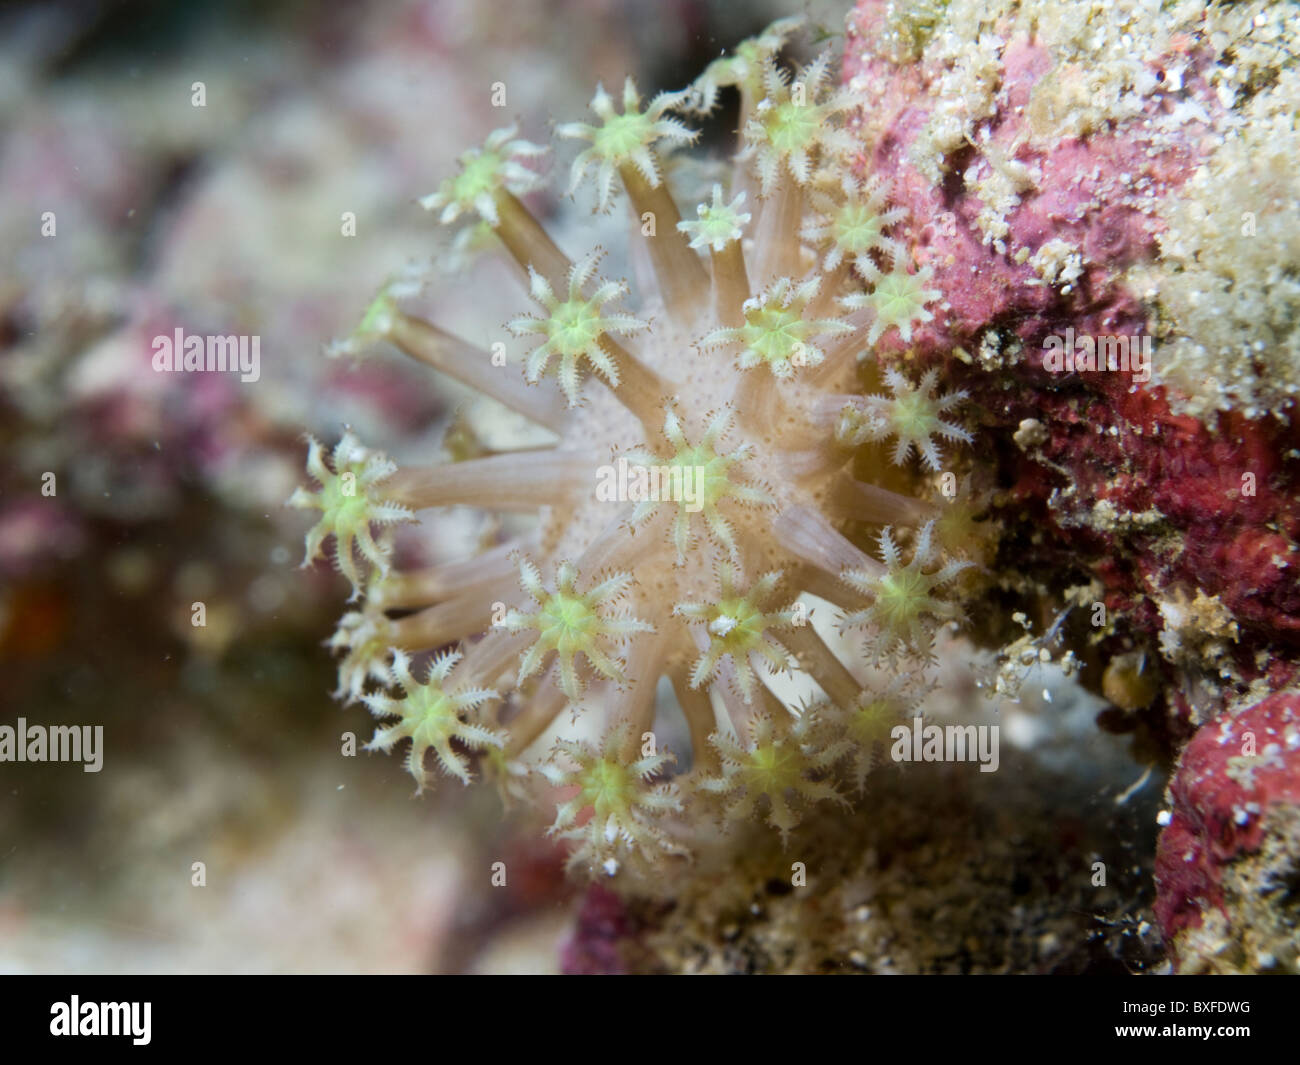 Soft coral. A kind of Octocorallia showing 8 individual polyps.  Borneo, Malaysia Stock Photo